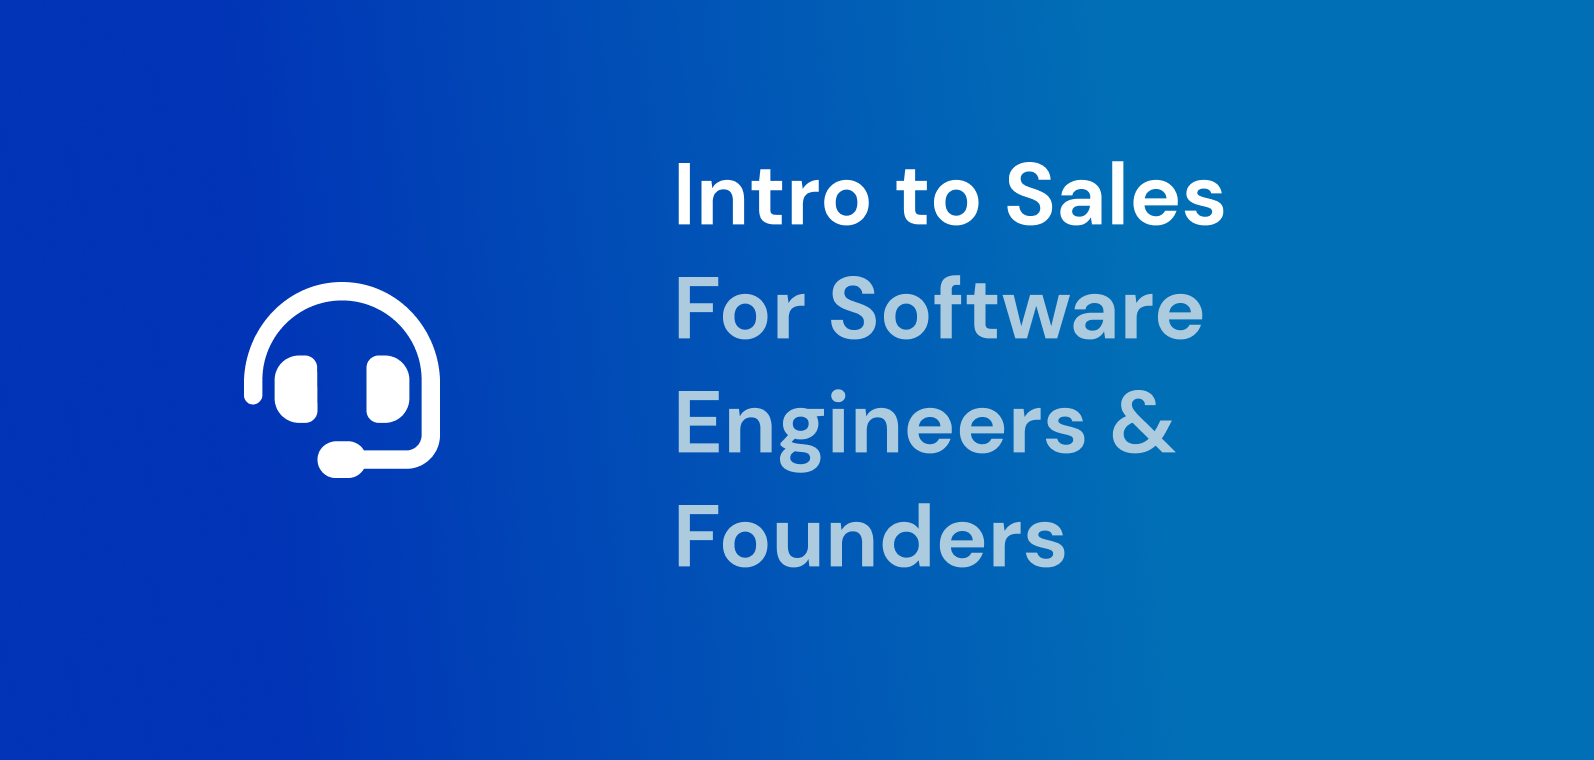 An introduction to sales for software engineers & founders